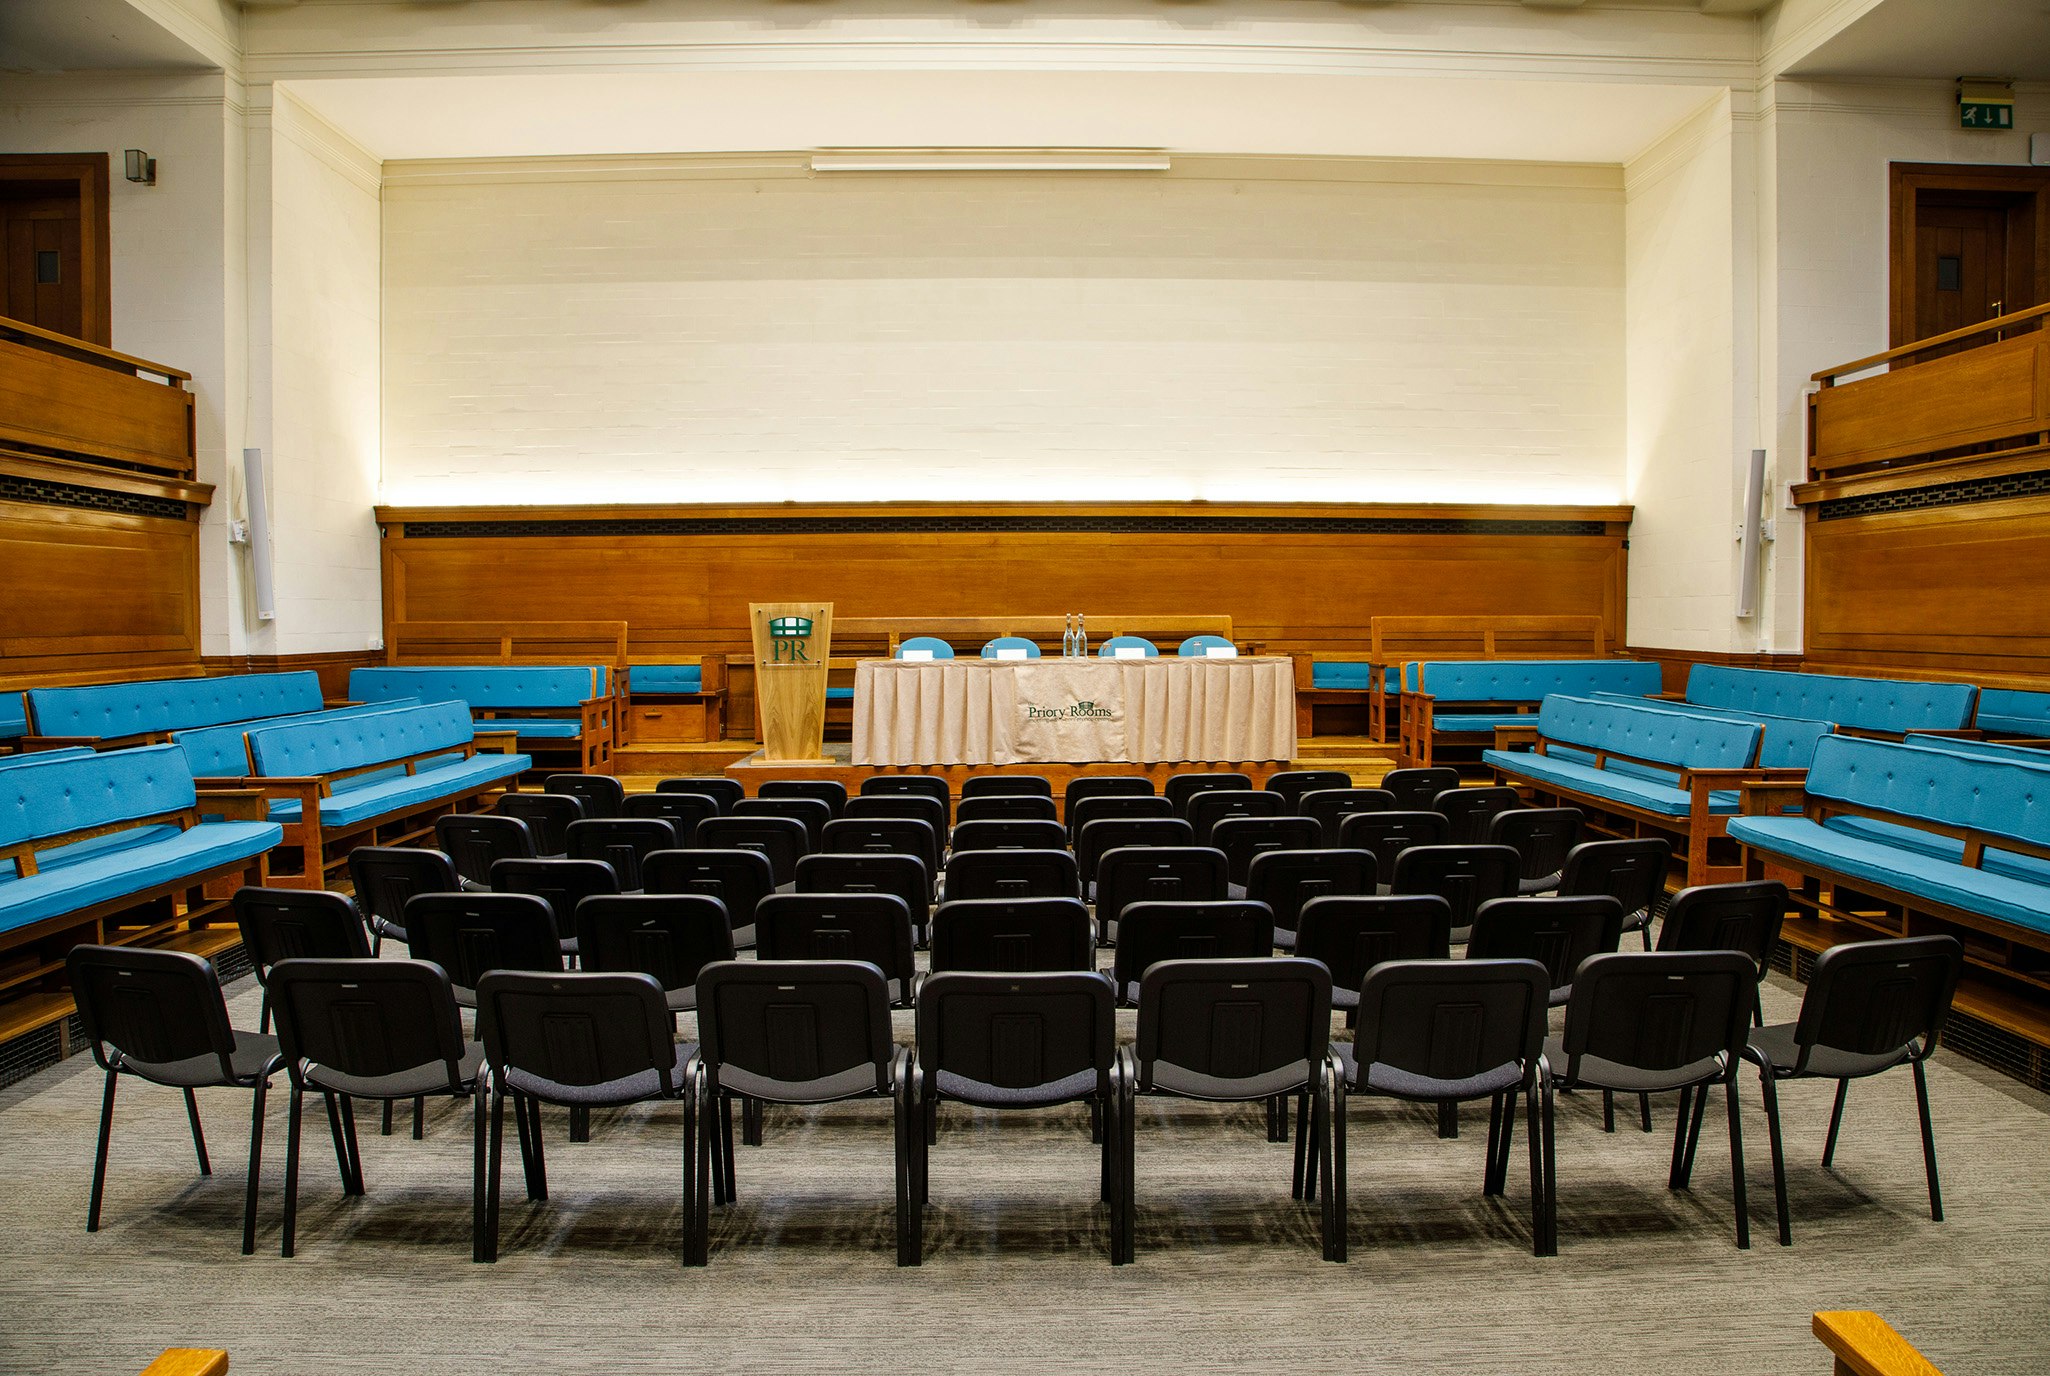 Hotel Conference Venues in Birmingham - The Priory Rooms Meeting and Conference Centre 